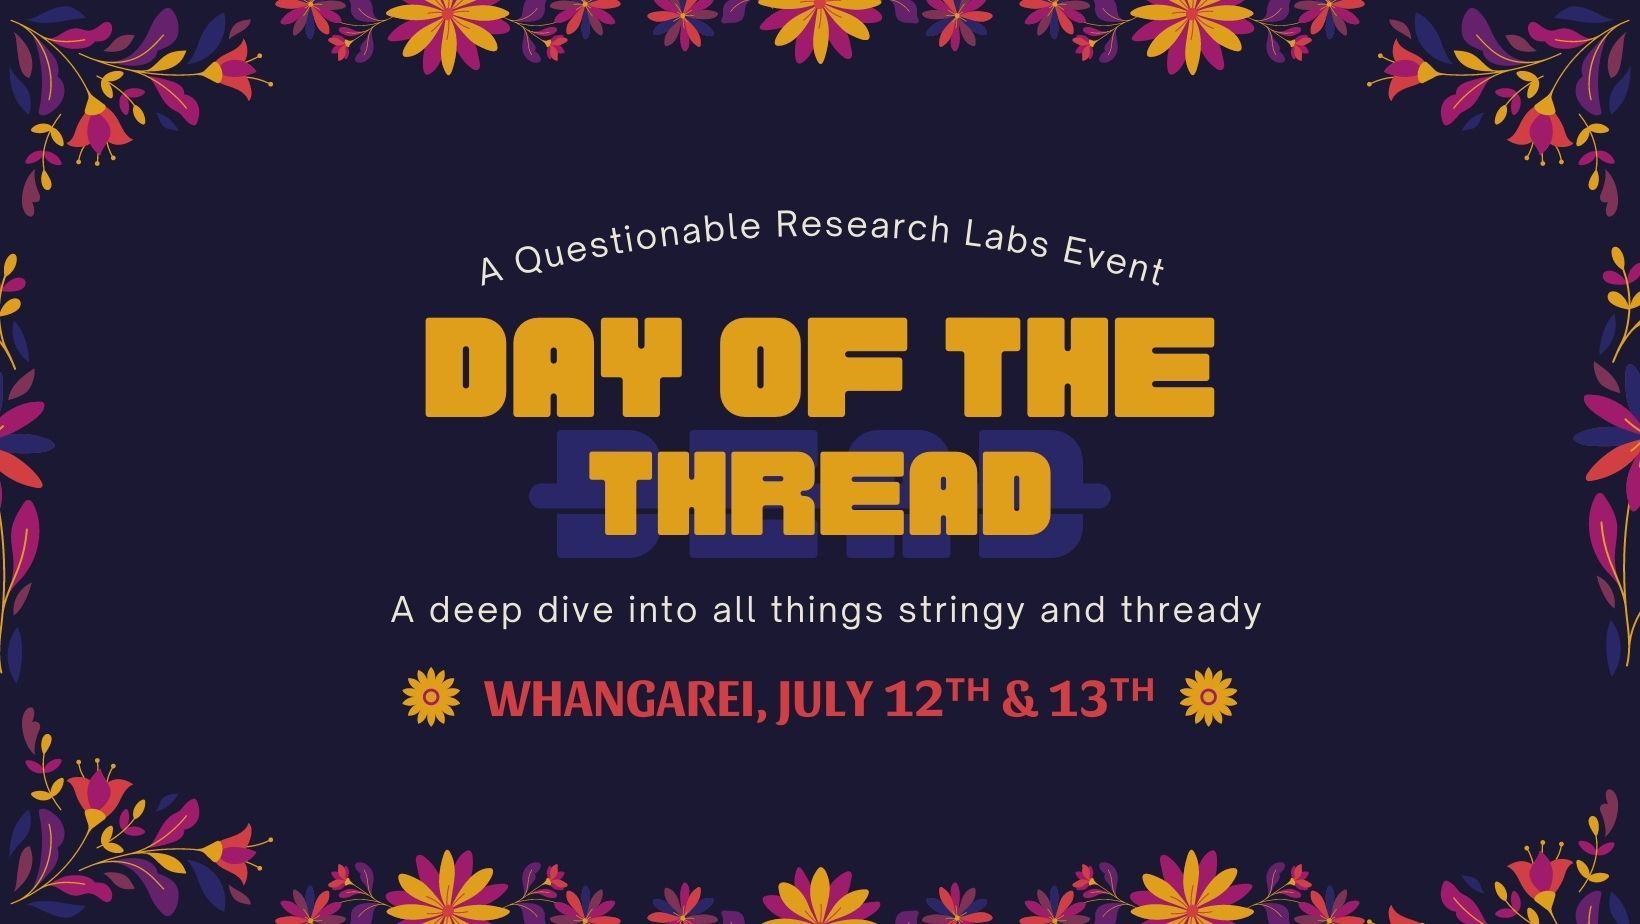 12th-13th July: Day of the Thread trip